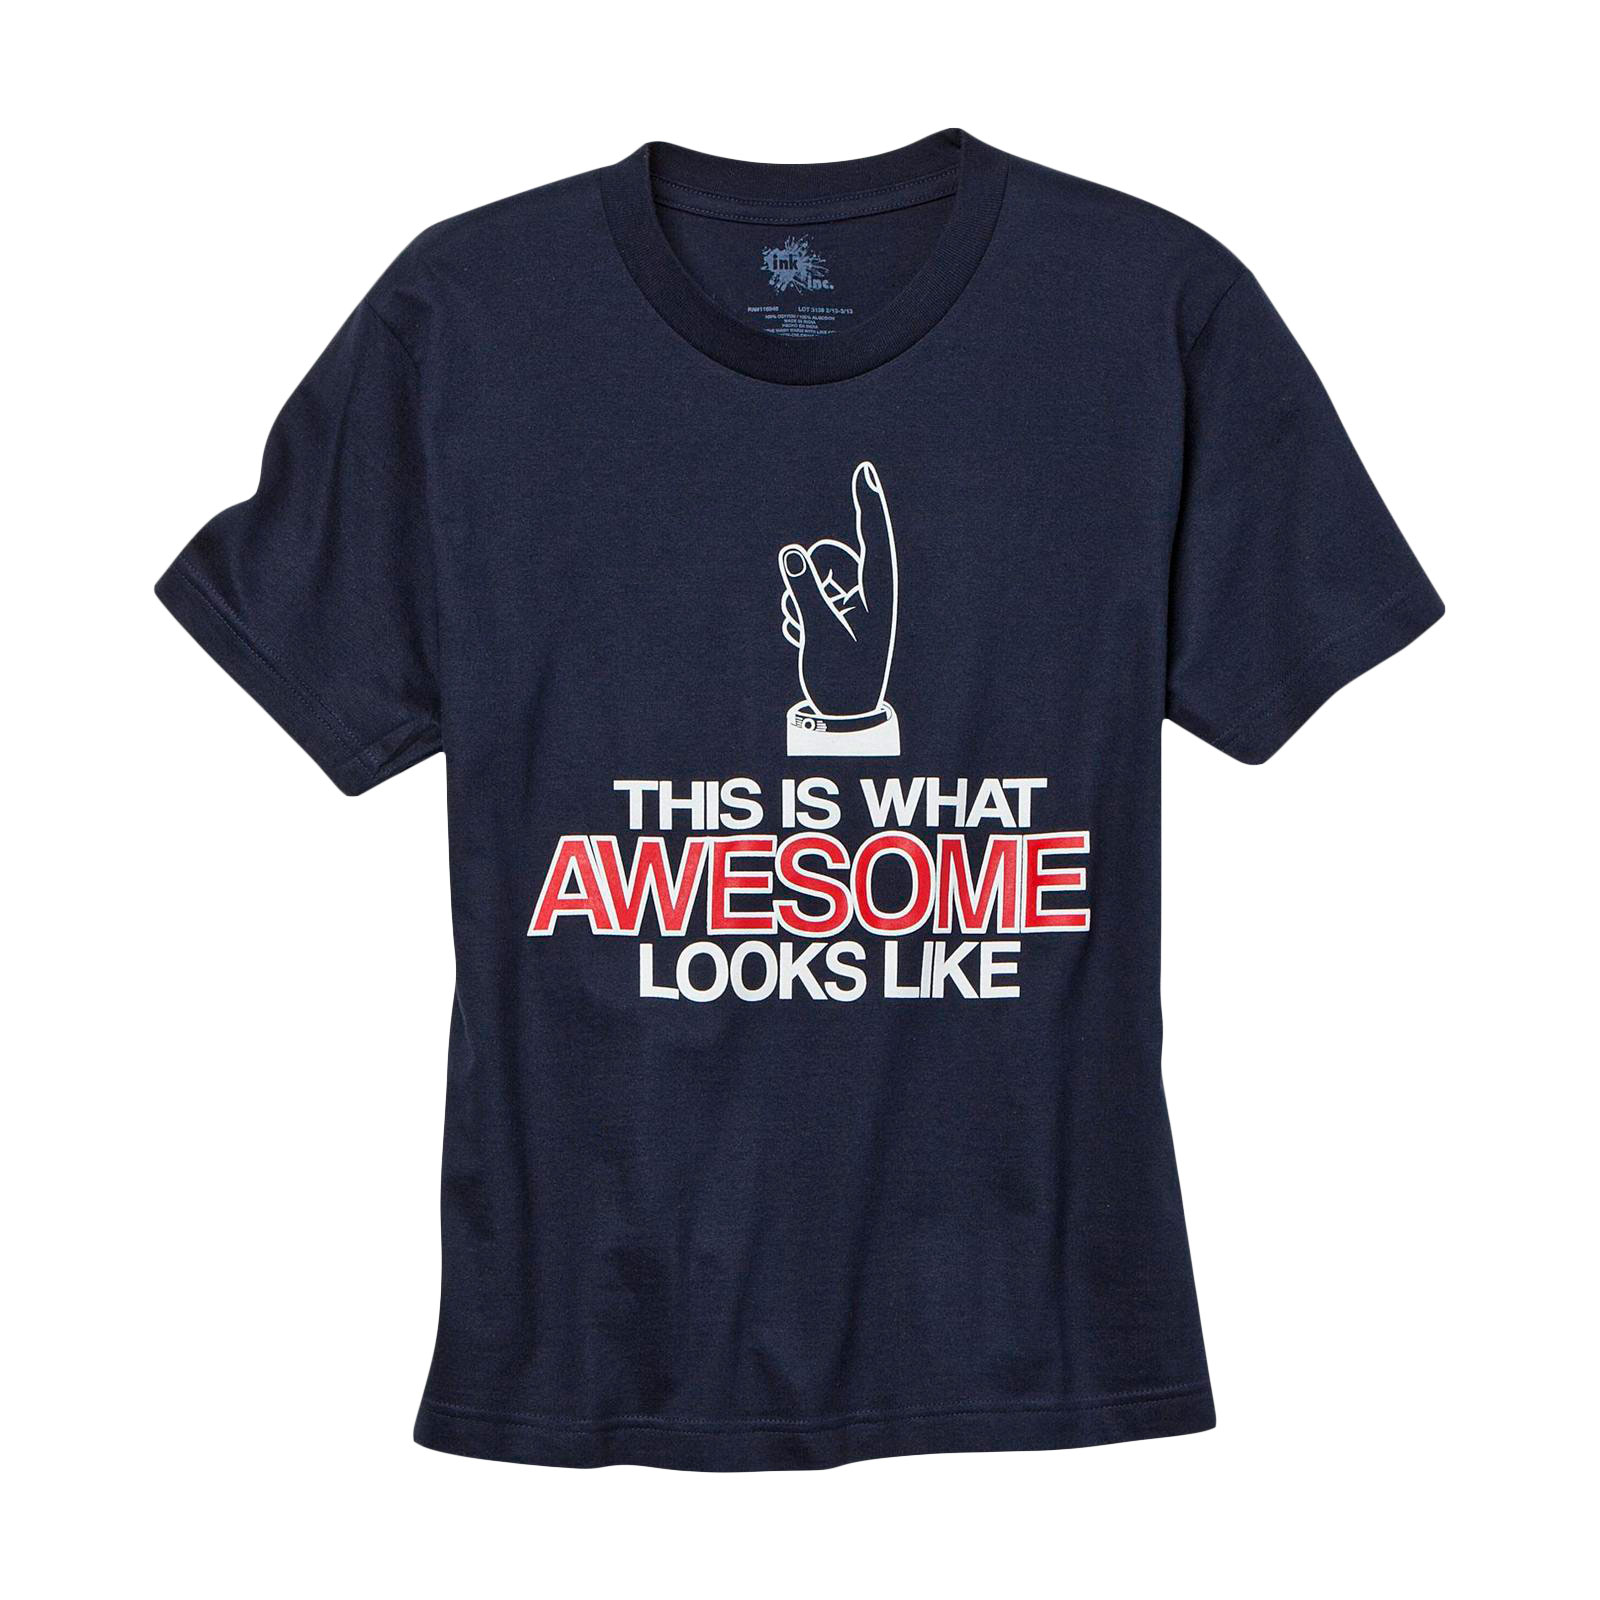 Boy's Graphic T-Shirt - Awesome